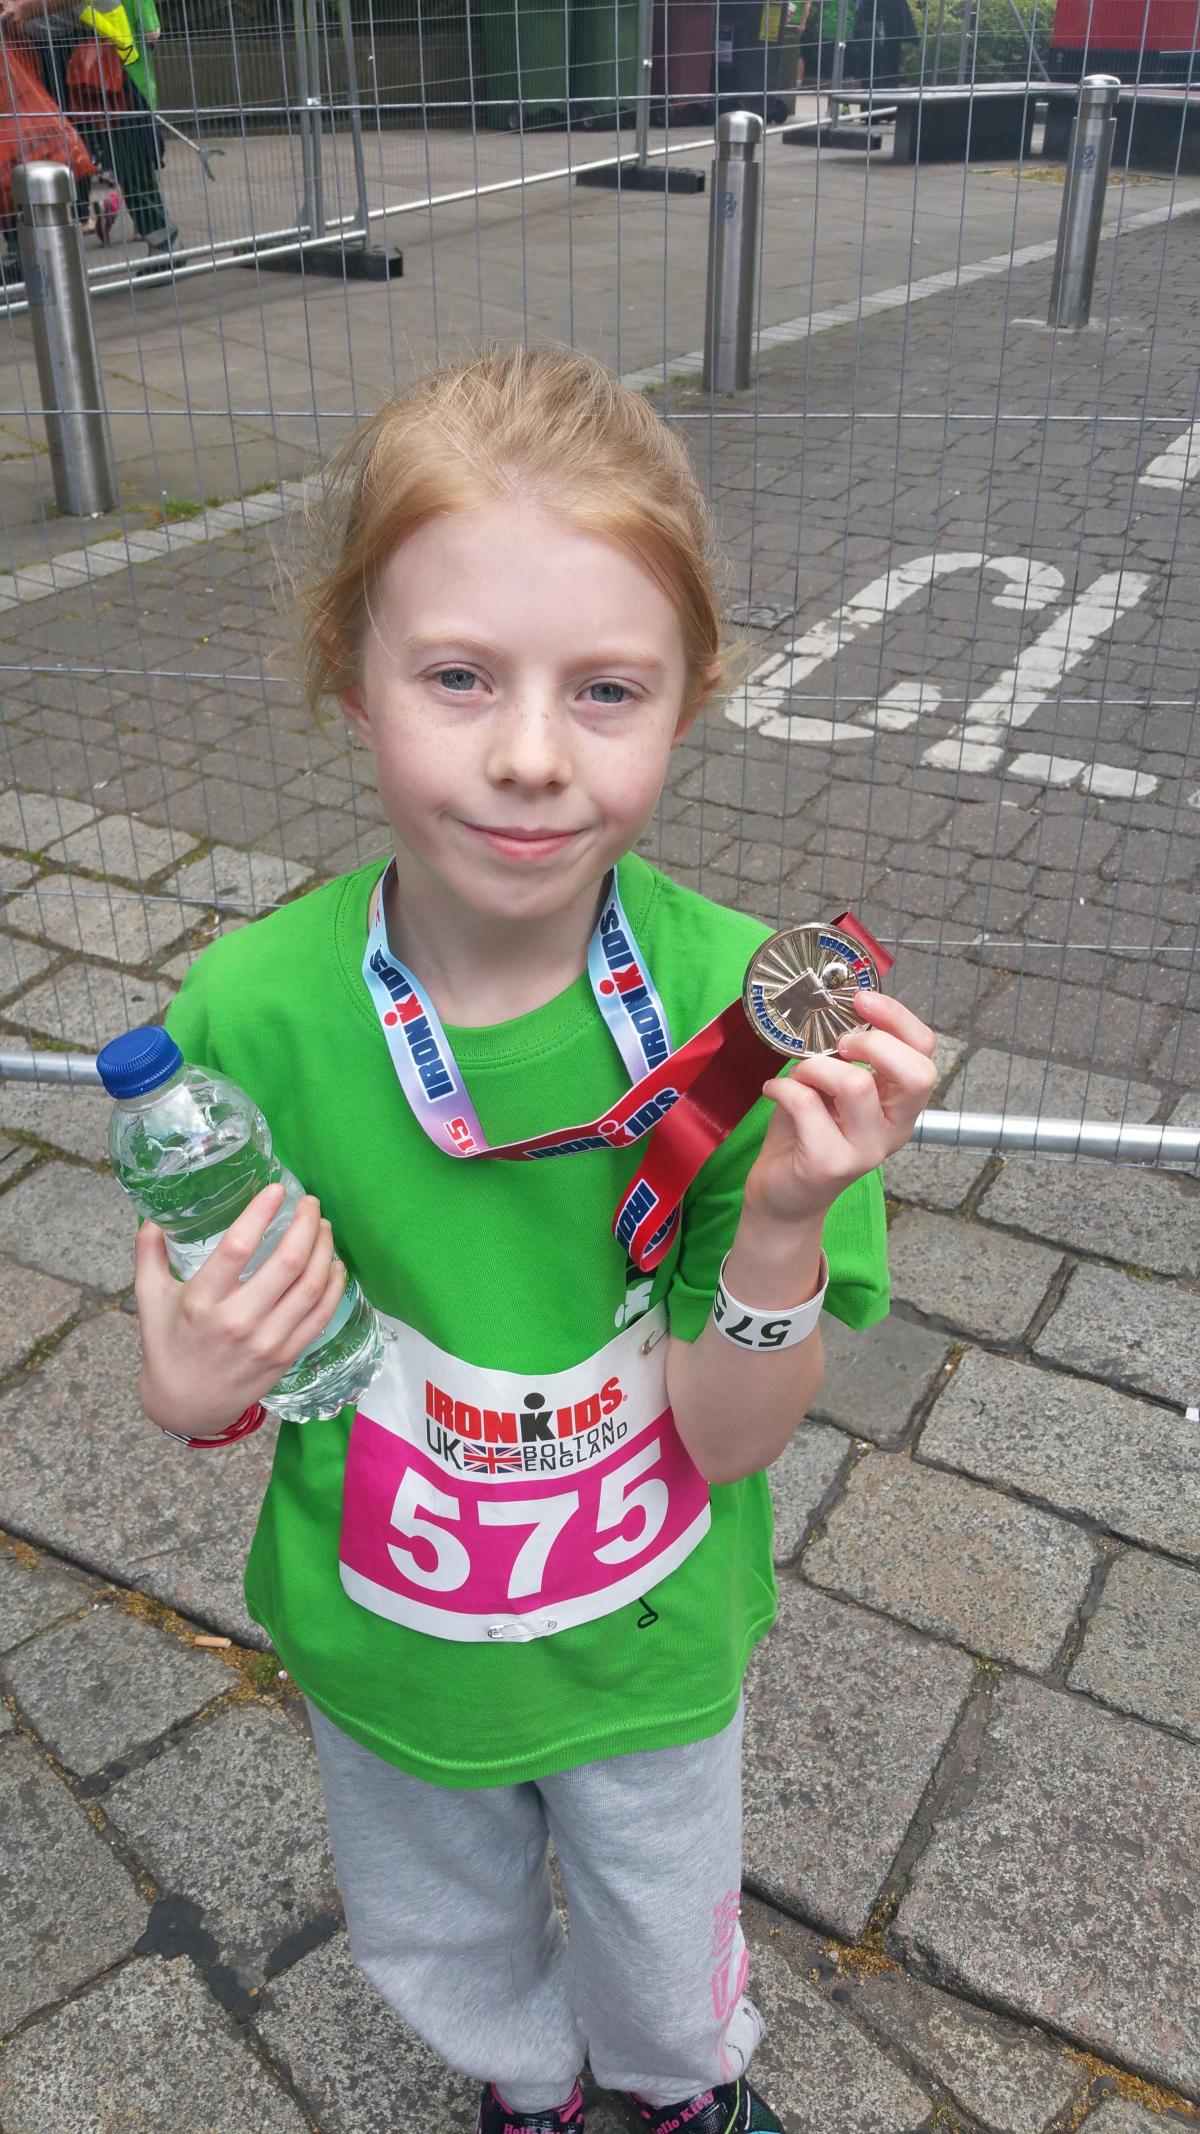 10-year-old Leah Hodge, from Westhoughton, shows off her medal.